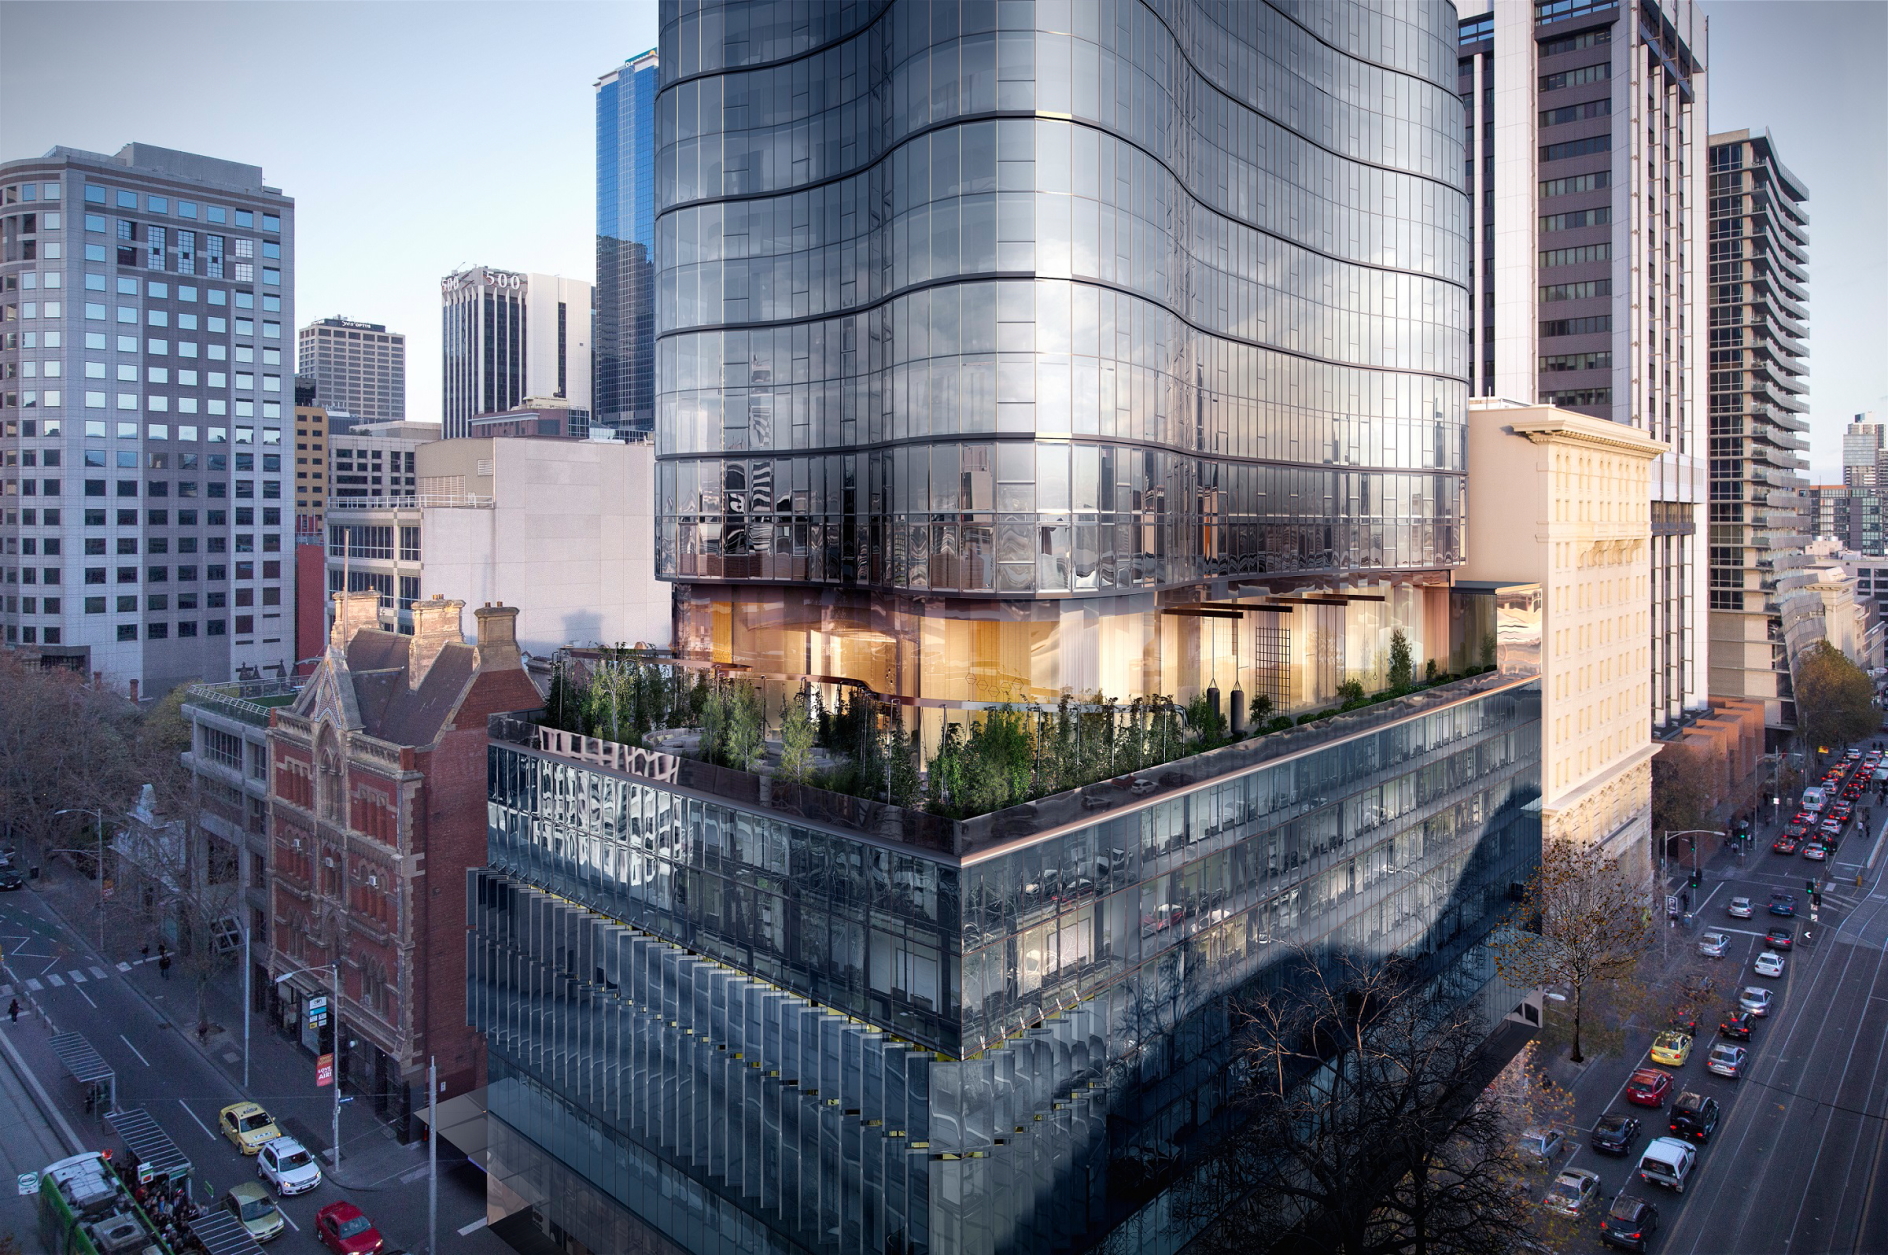 Situated at the meeting point of Spencer and Bourke Streets in the CBD, the 172-room Mövenpick Hotel Melbourne on Spencer will form the six-level podium of the striking 78-storey Elenberg Fraser architect-designed Premier Tower development. Click to enlarge.